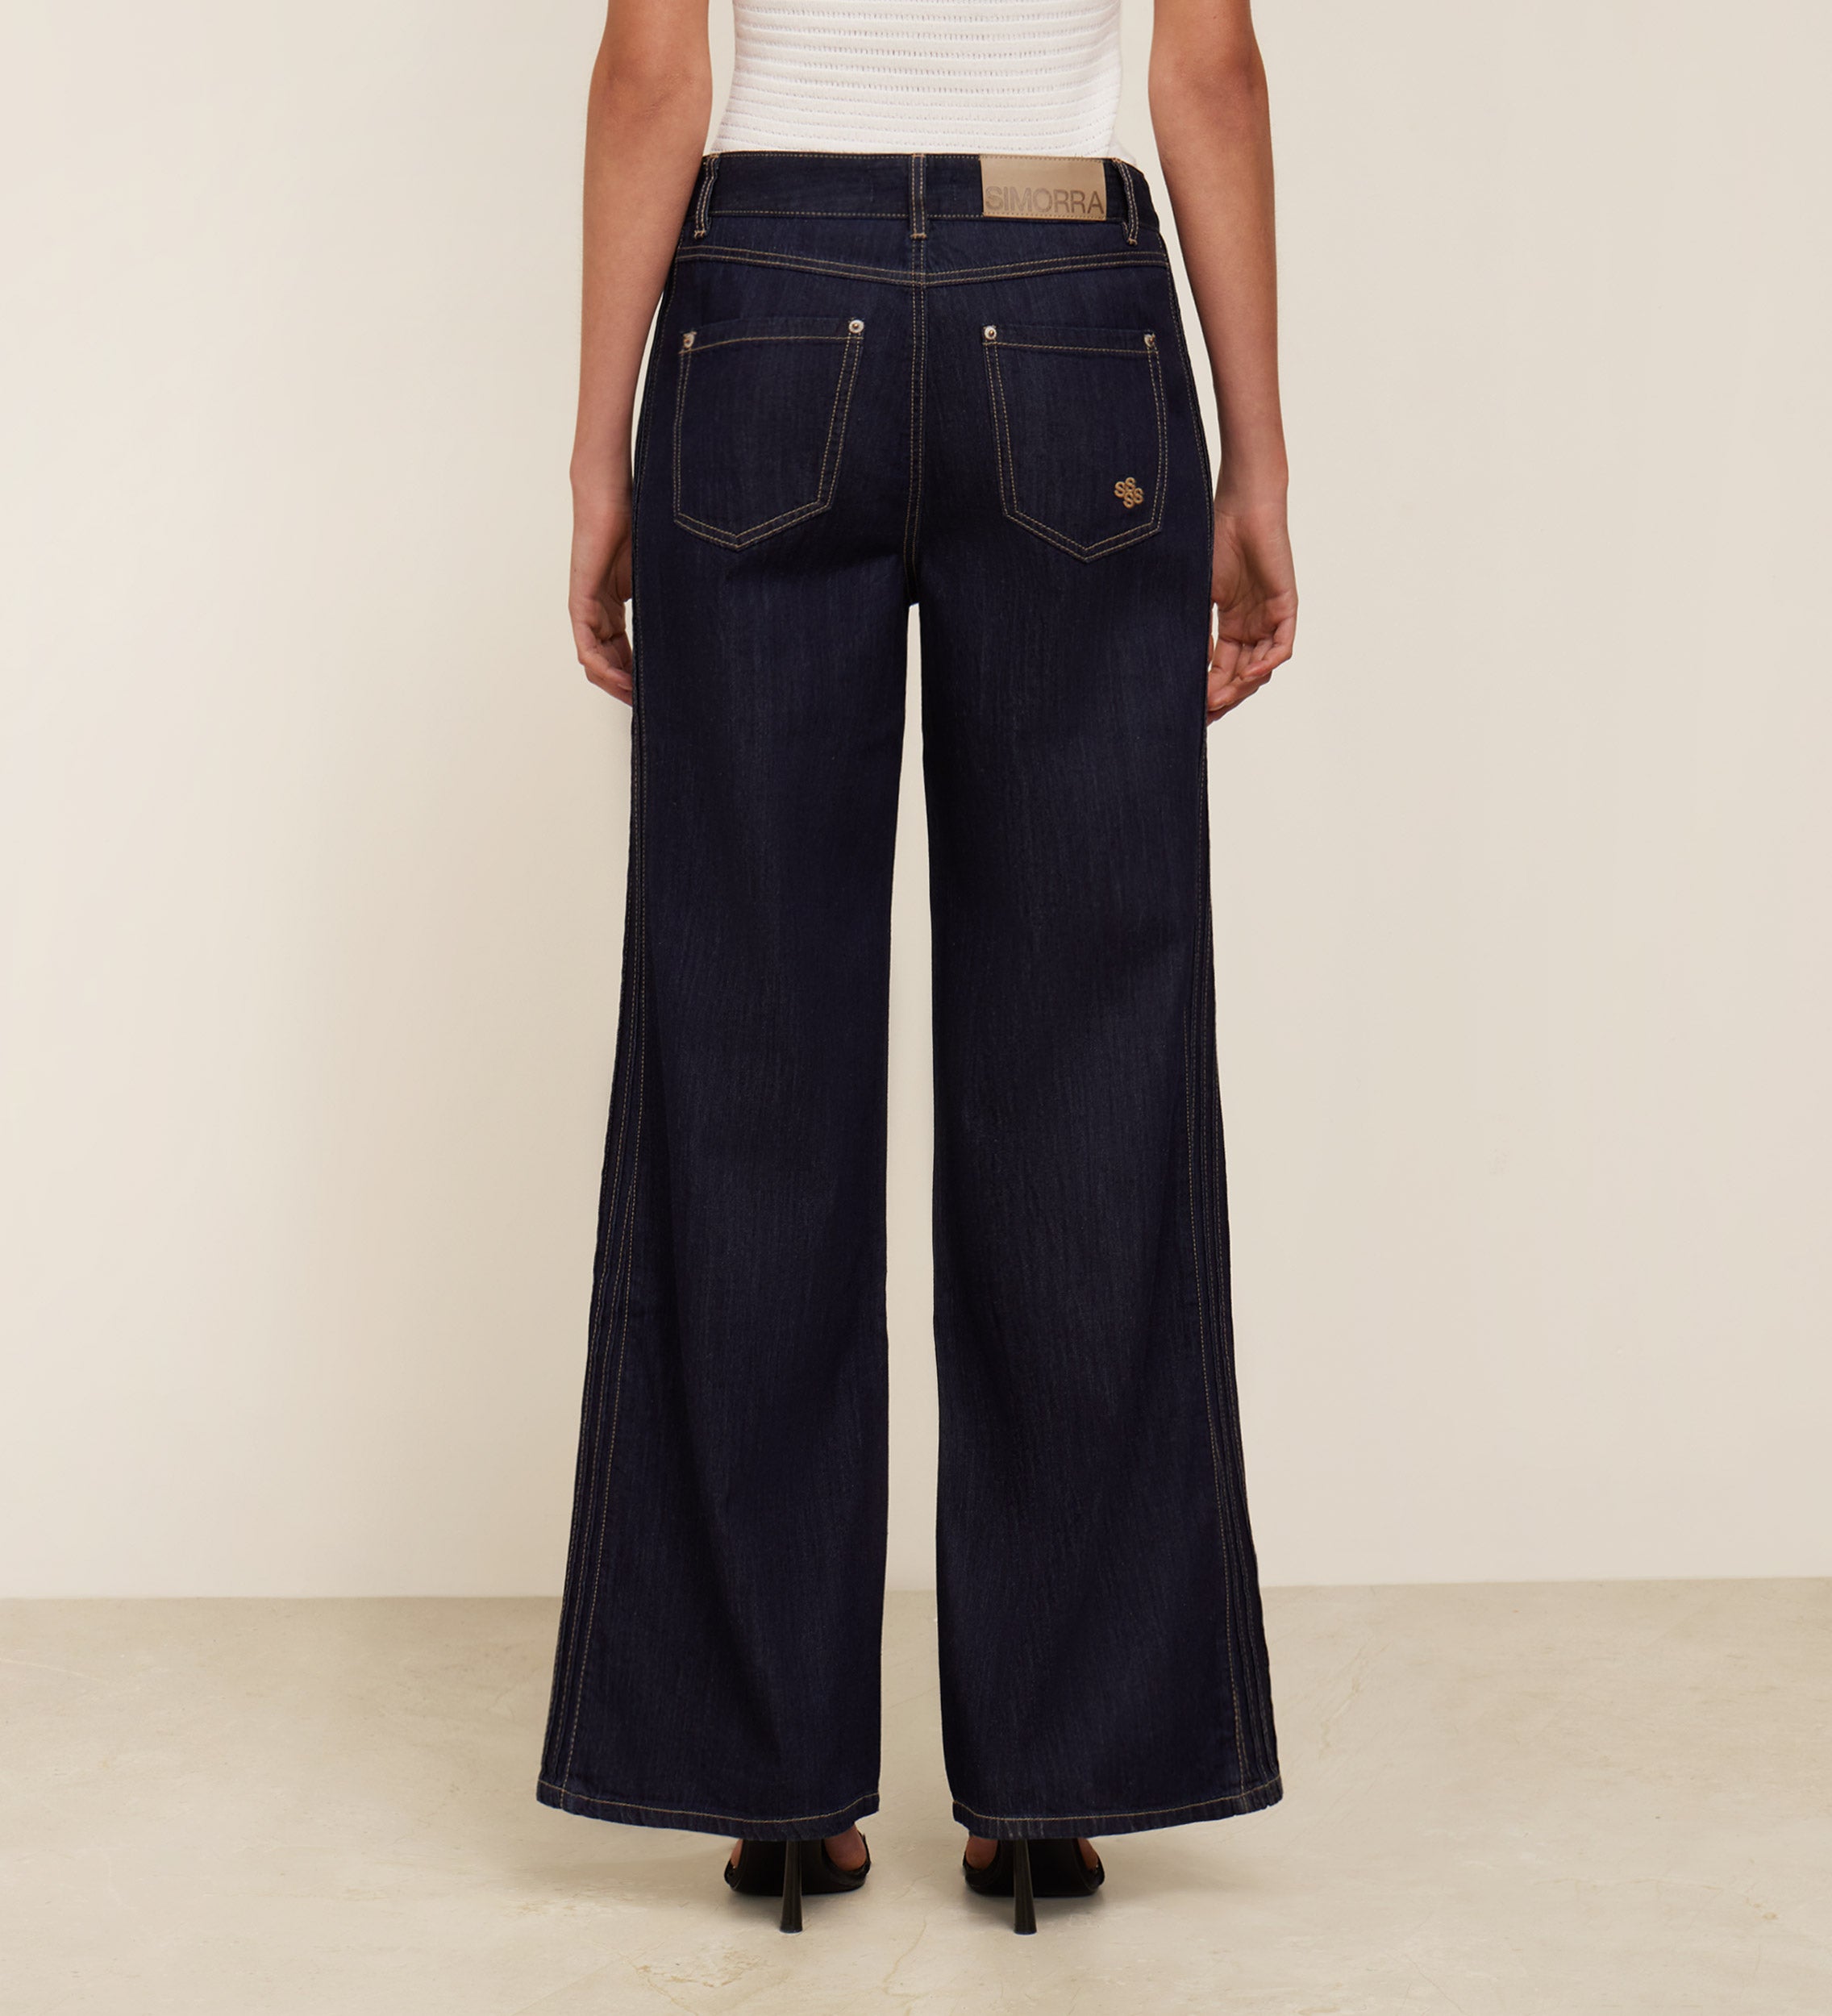 Wide leg pants with drawstrings